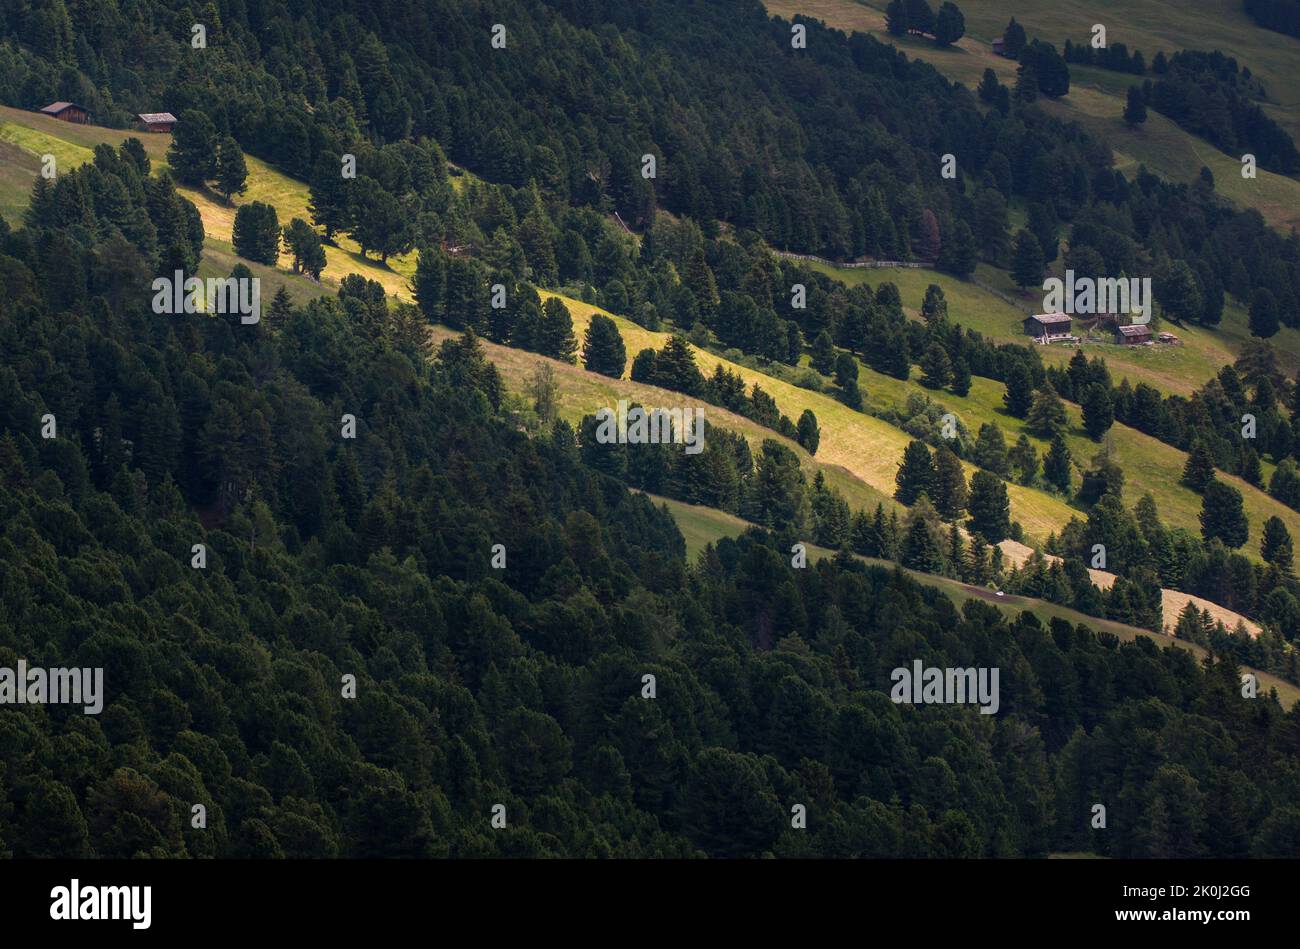 Farms and barns in the clearings at the edge of the forest, on the lower slope of the path that climbs towards the Klausner Hütte refuge, Valle di Isa Stock Photo